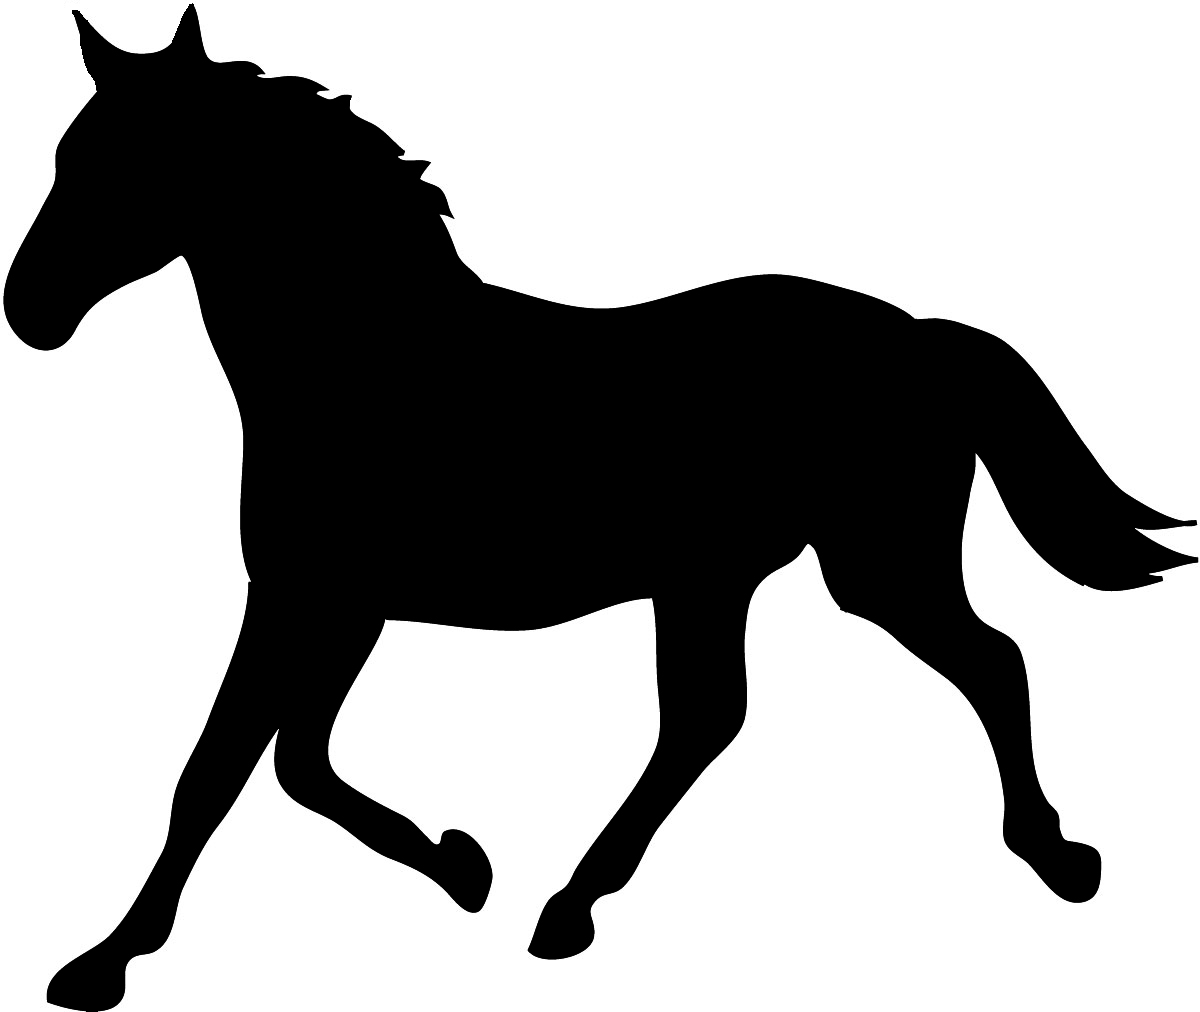 Free Horse Silhouettes, Download Free Clip Art, Free Clip.